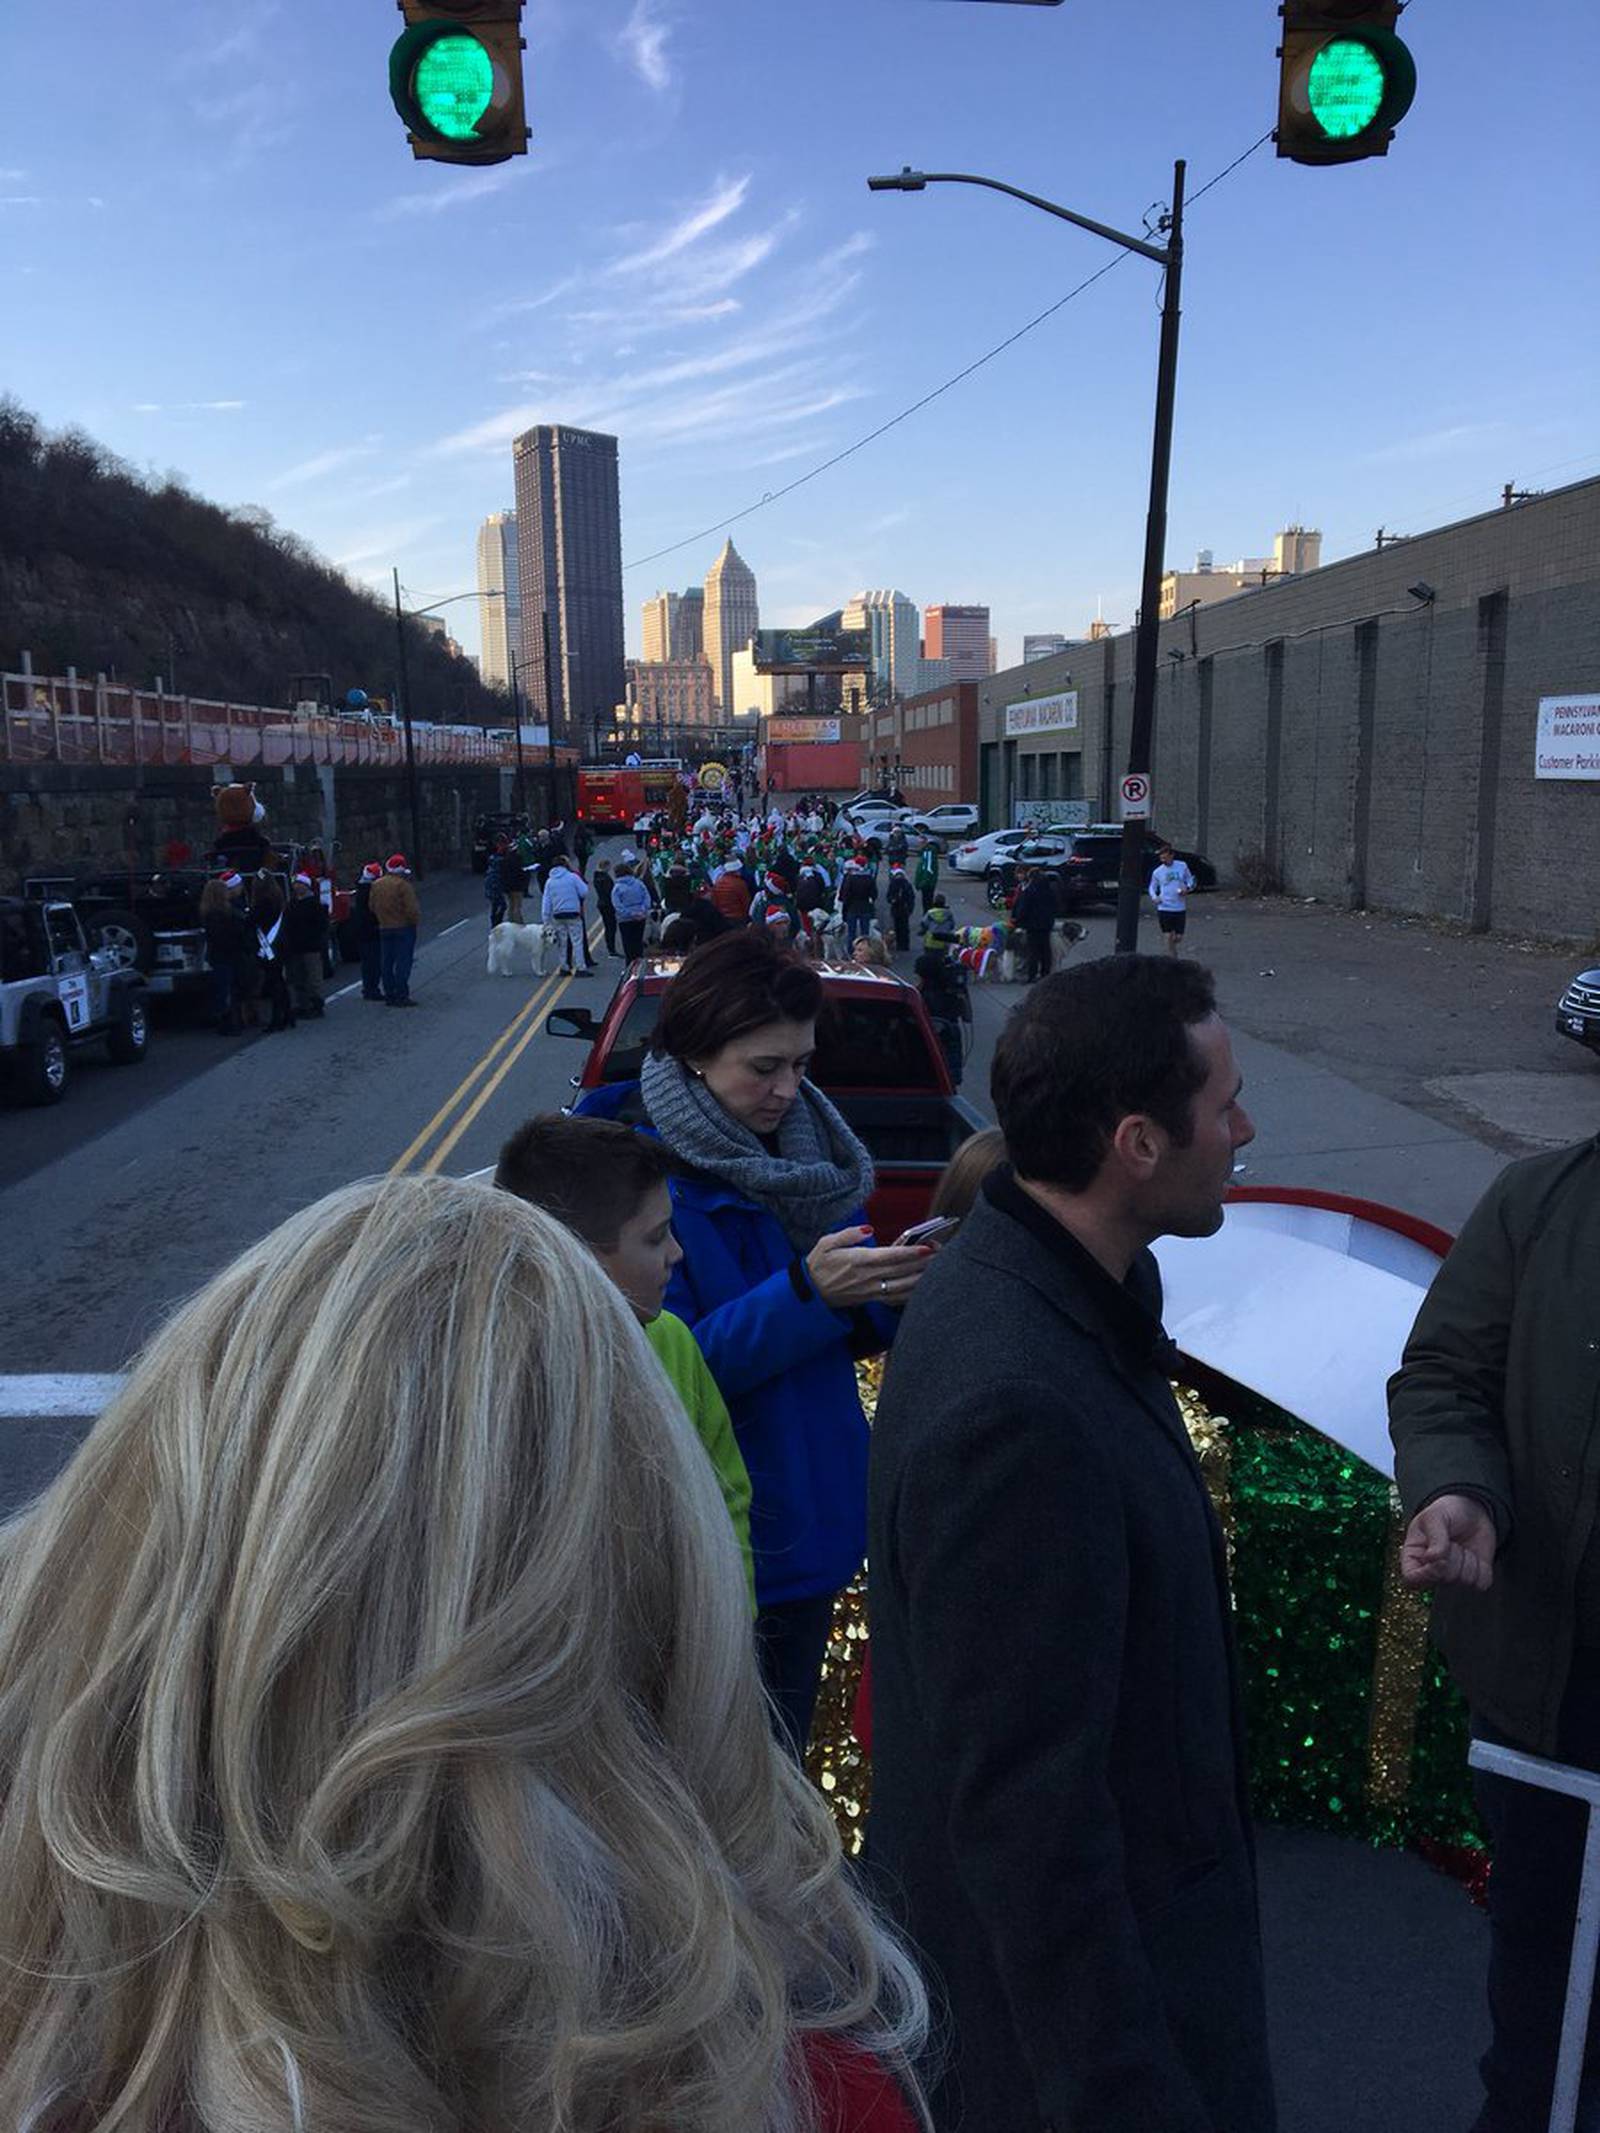 WPXI Holiday Parade on social WPXI